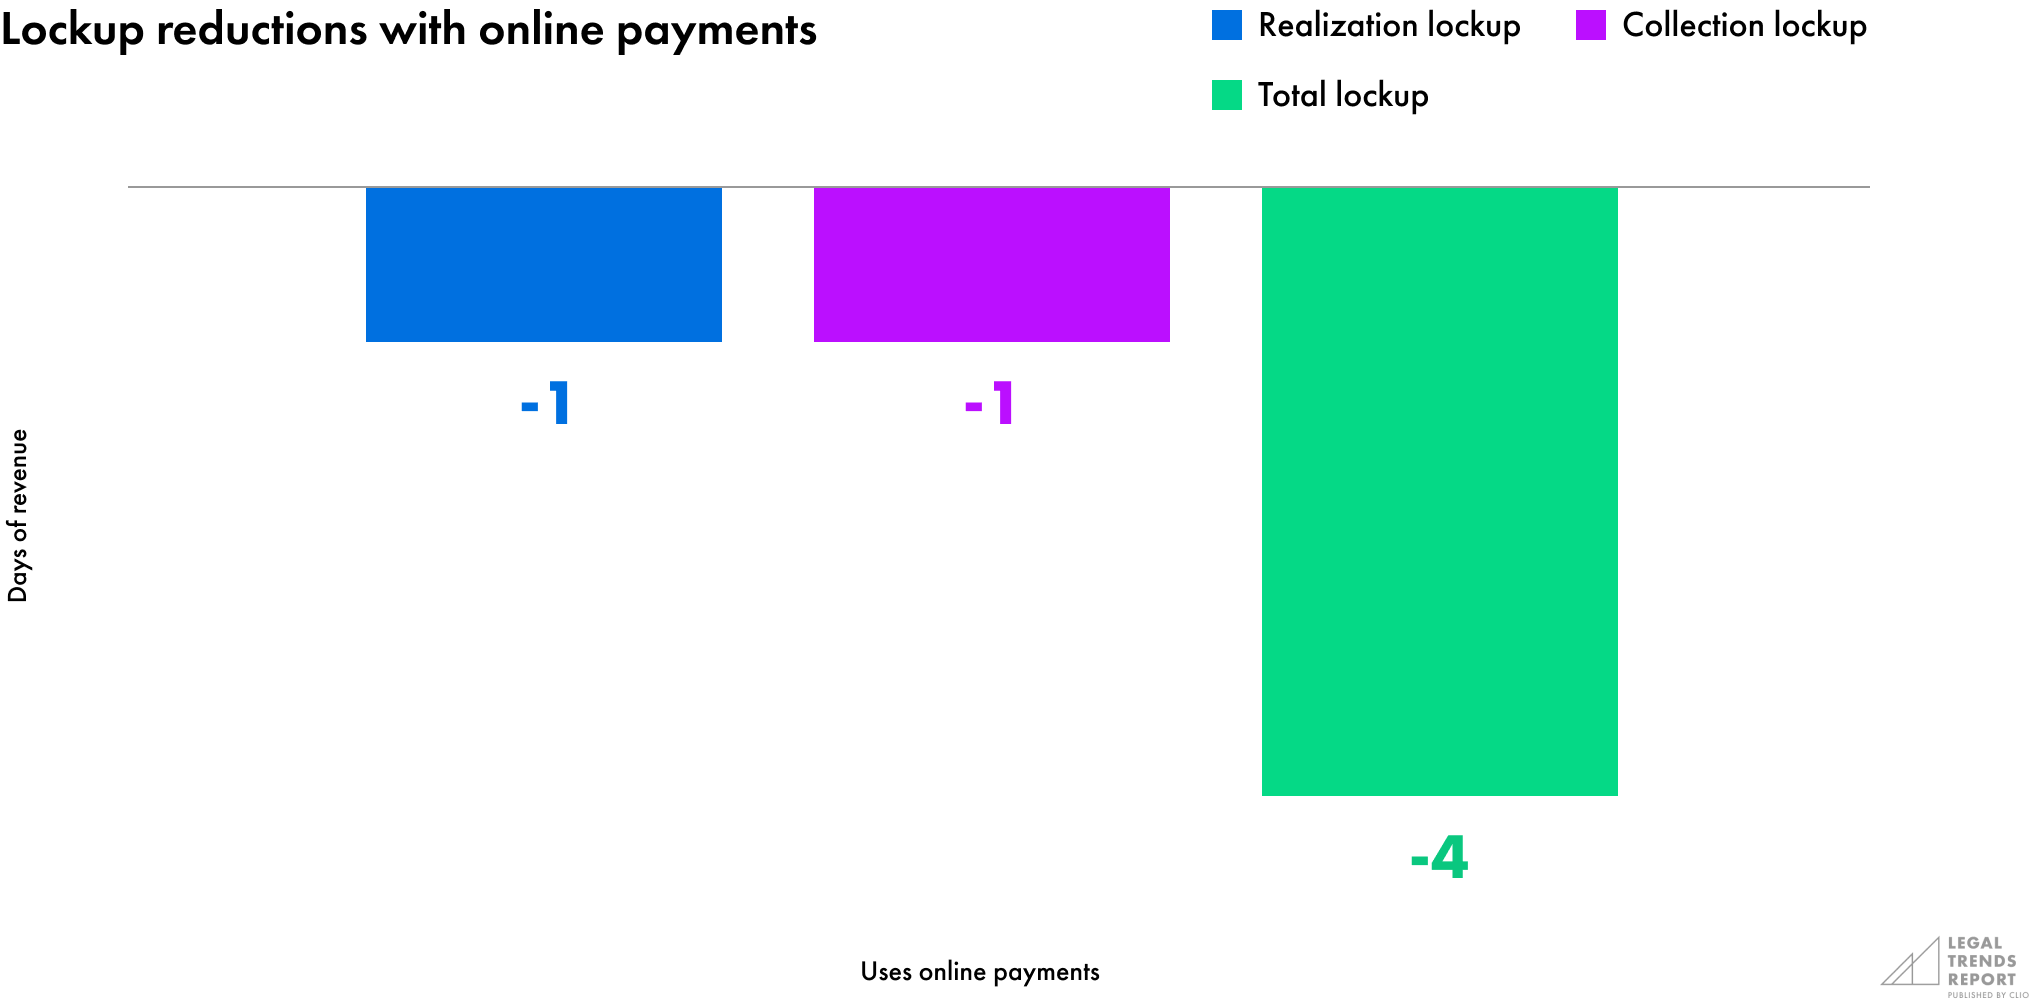 Lockup reductions with online payments